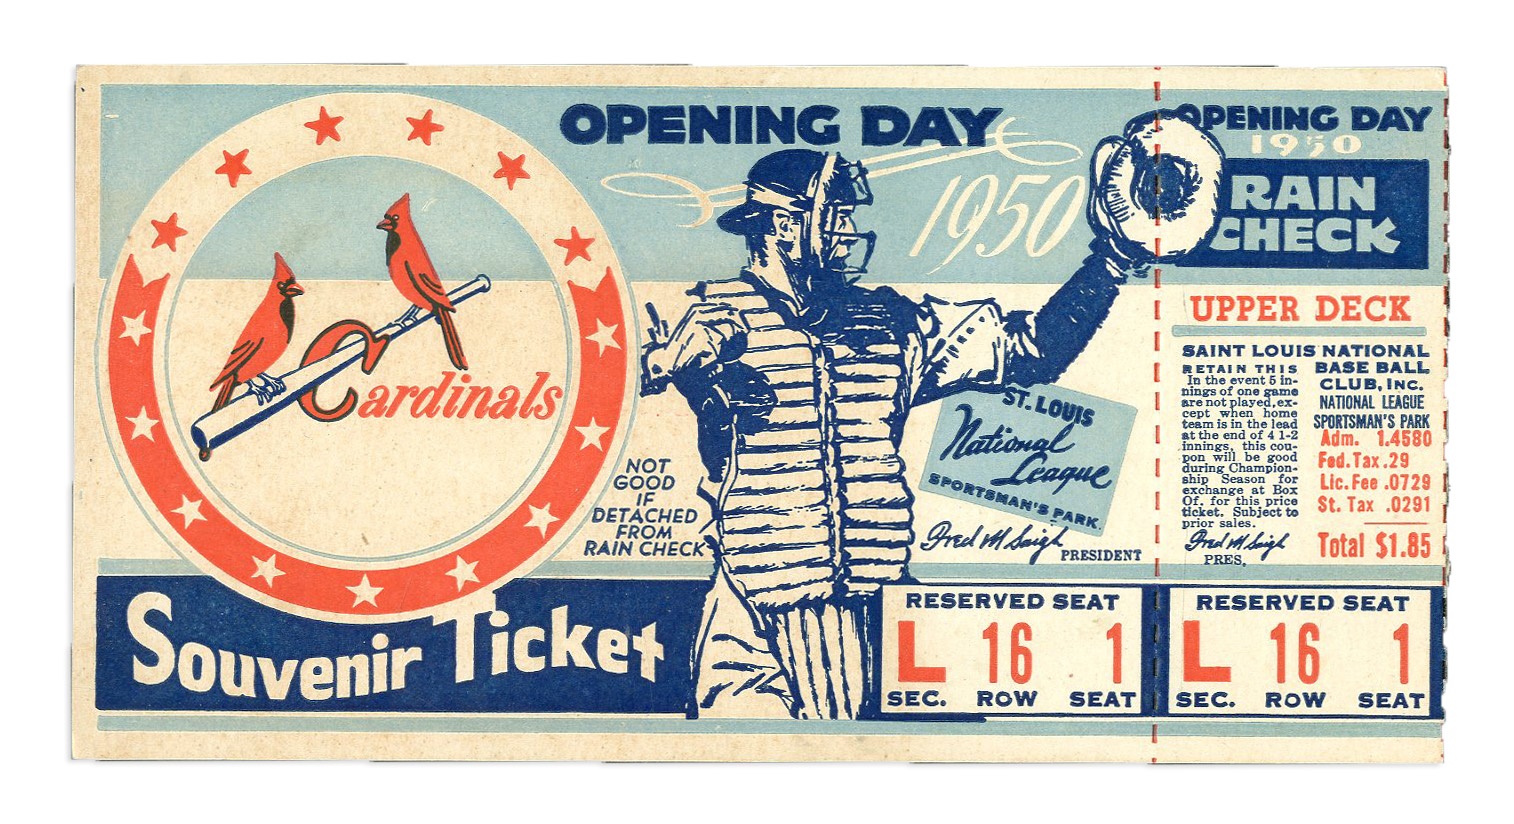 - 1950 St. Louis Cardinals Opening Day Ticket Postcard